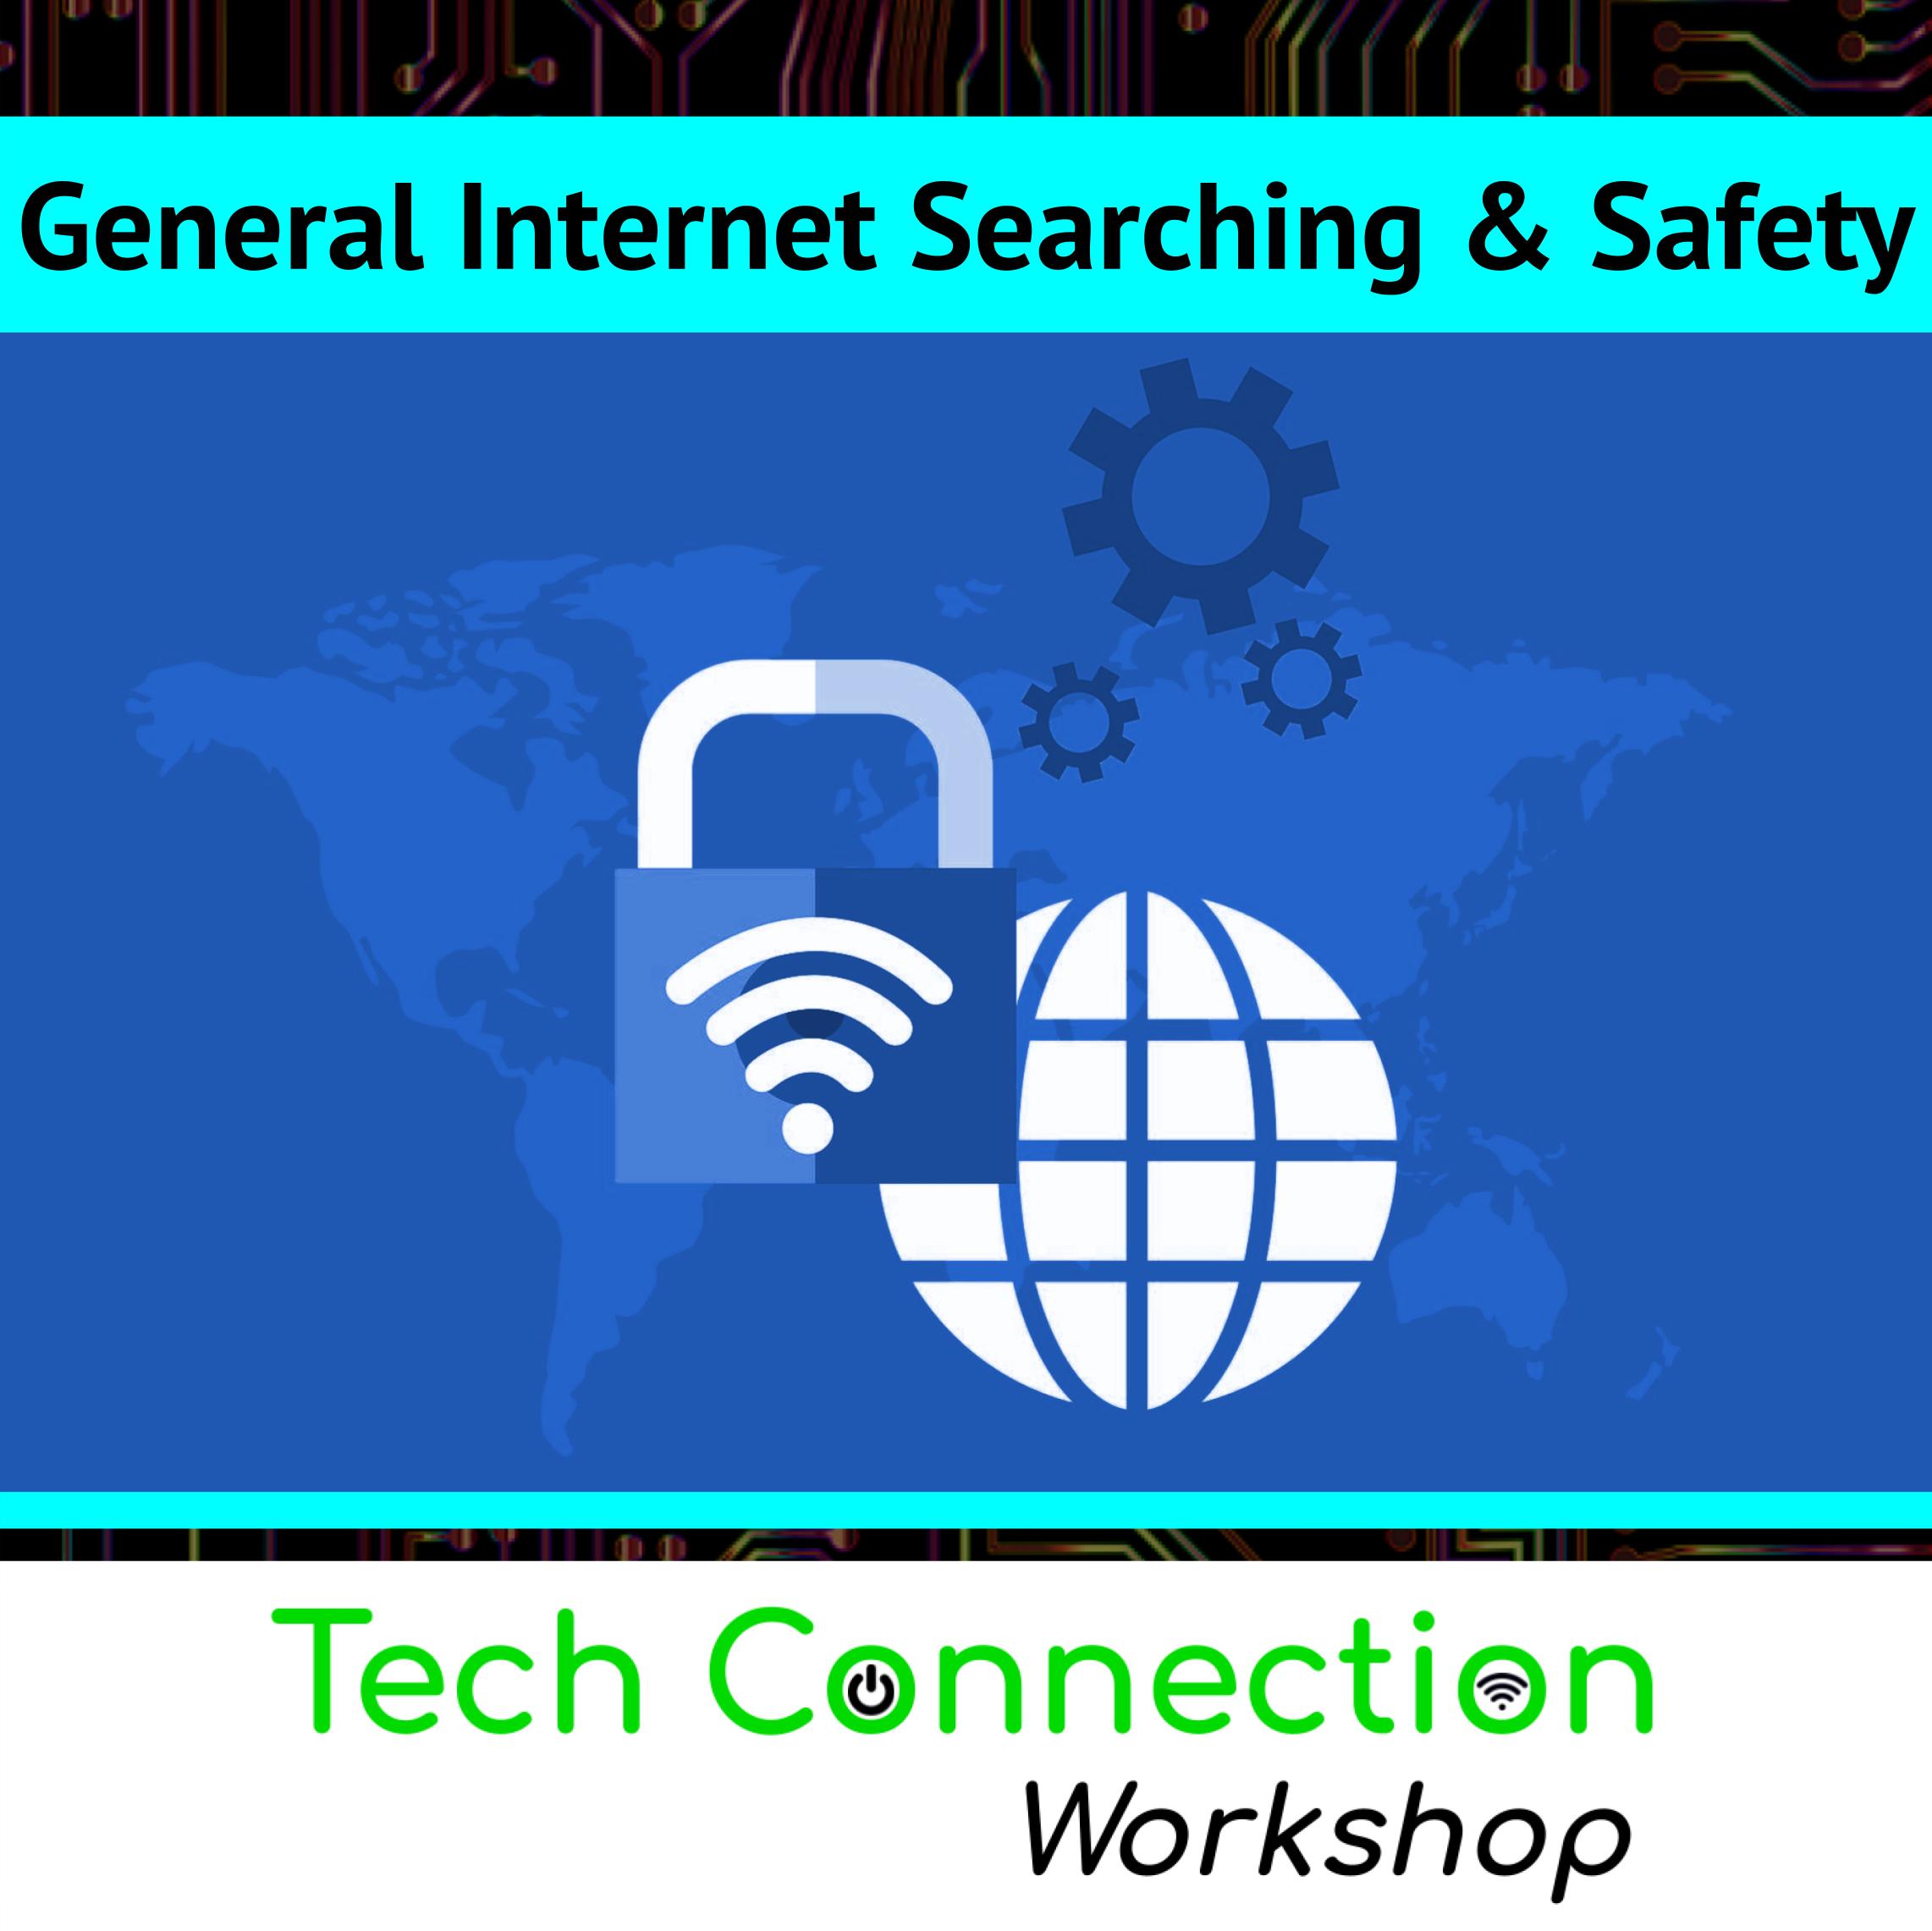 General Internet Searching & Safety: Tech Connection Workshop